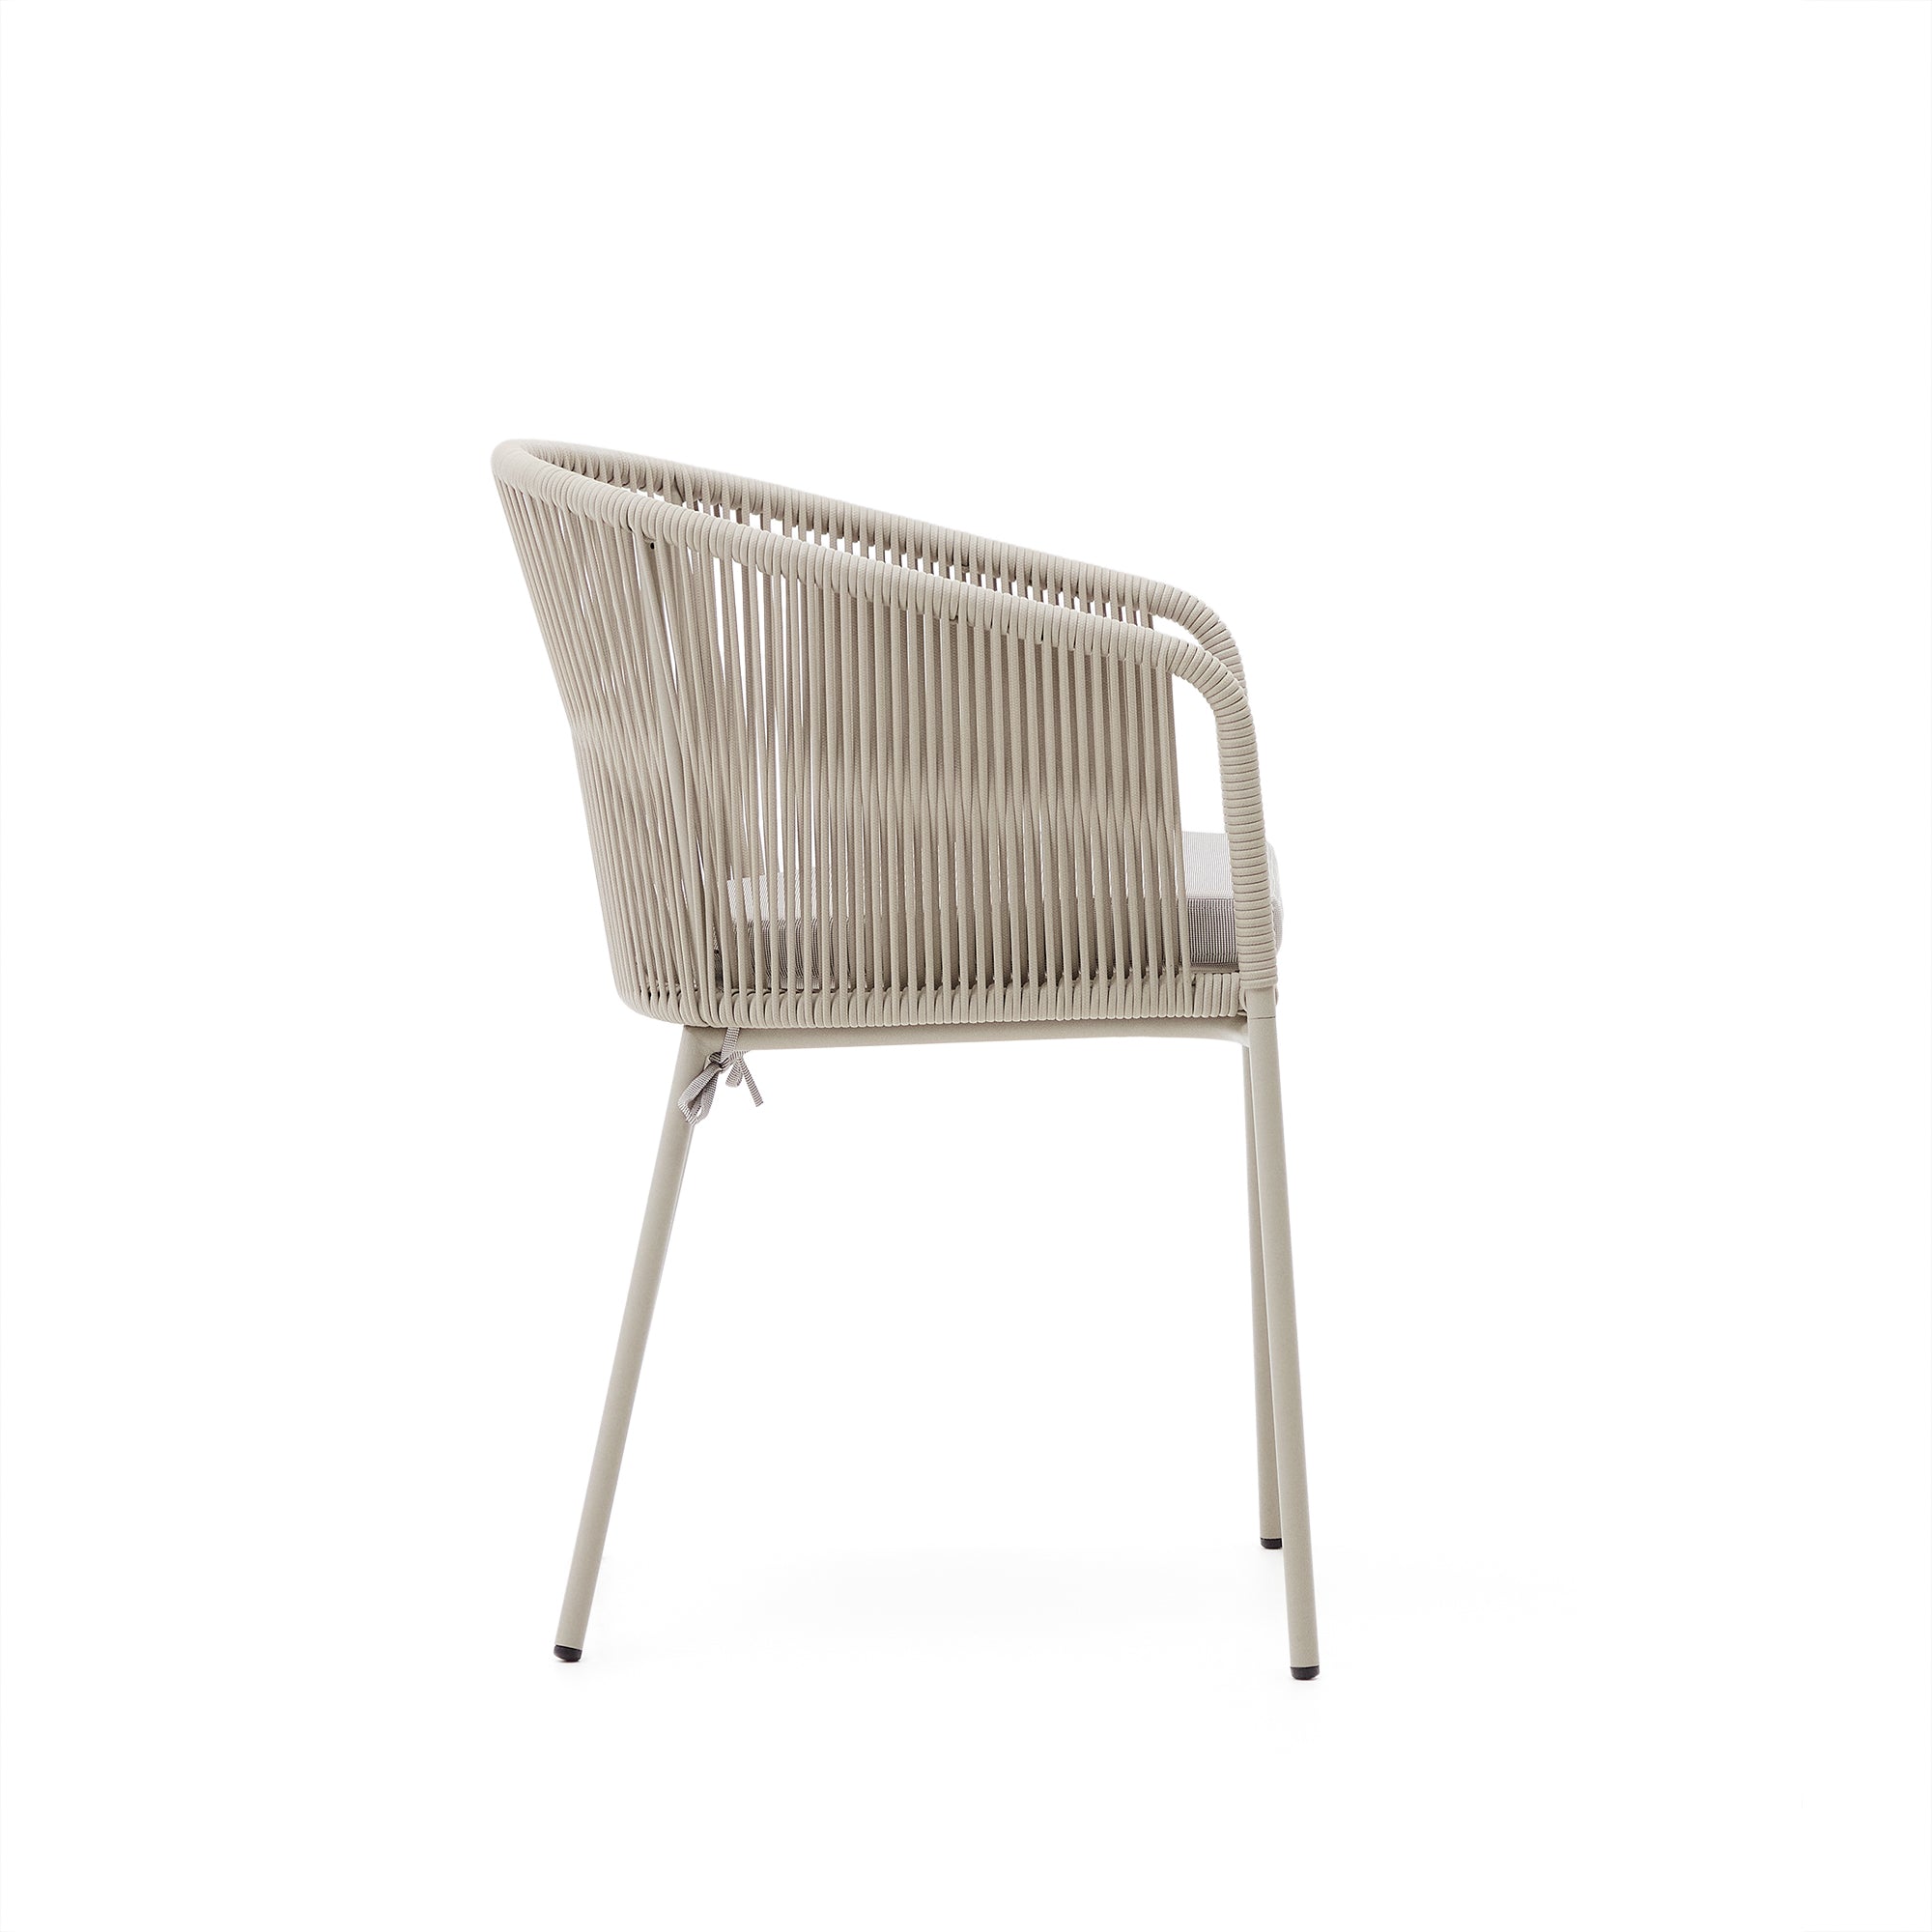 Yanet chair with synthetic rope in ecru color and galvanized steel legs